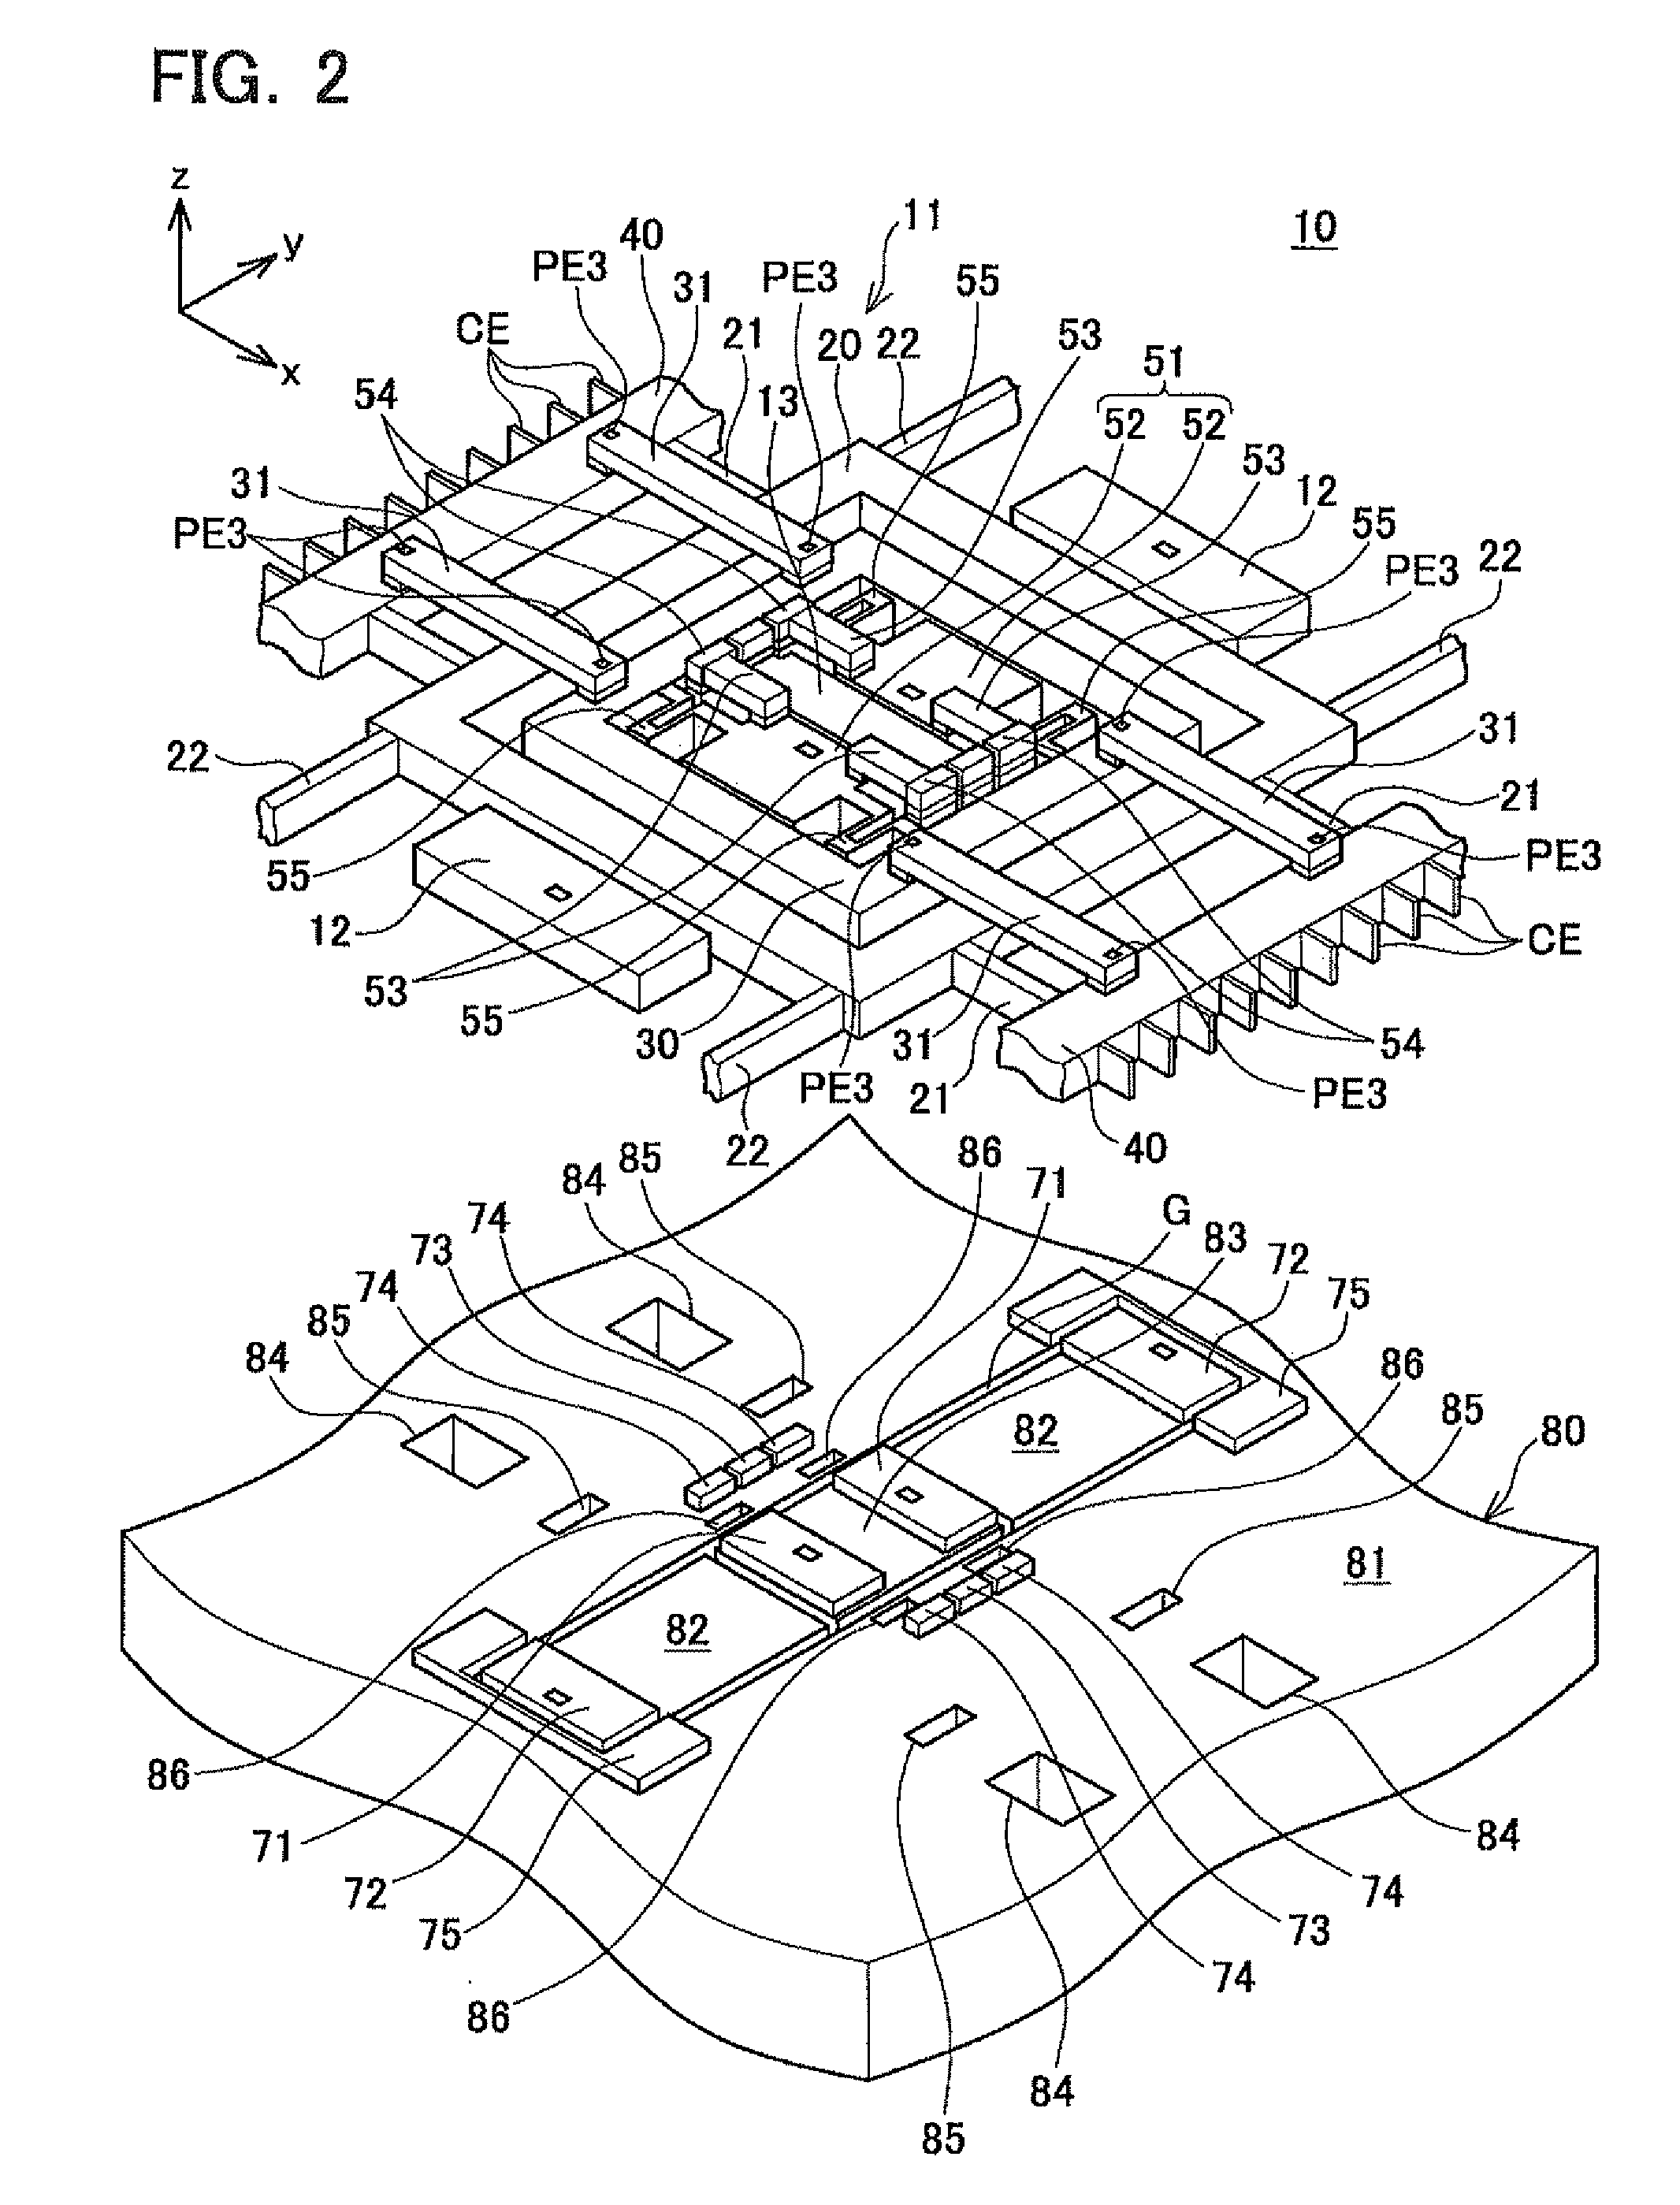 Laminated structure provided with movable portion